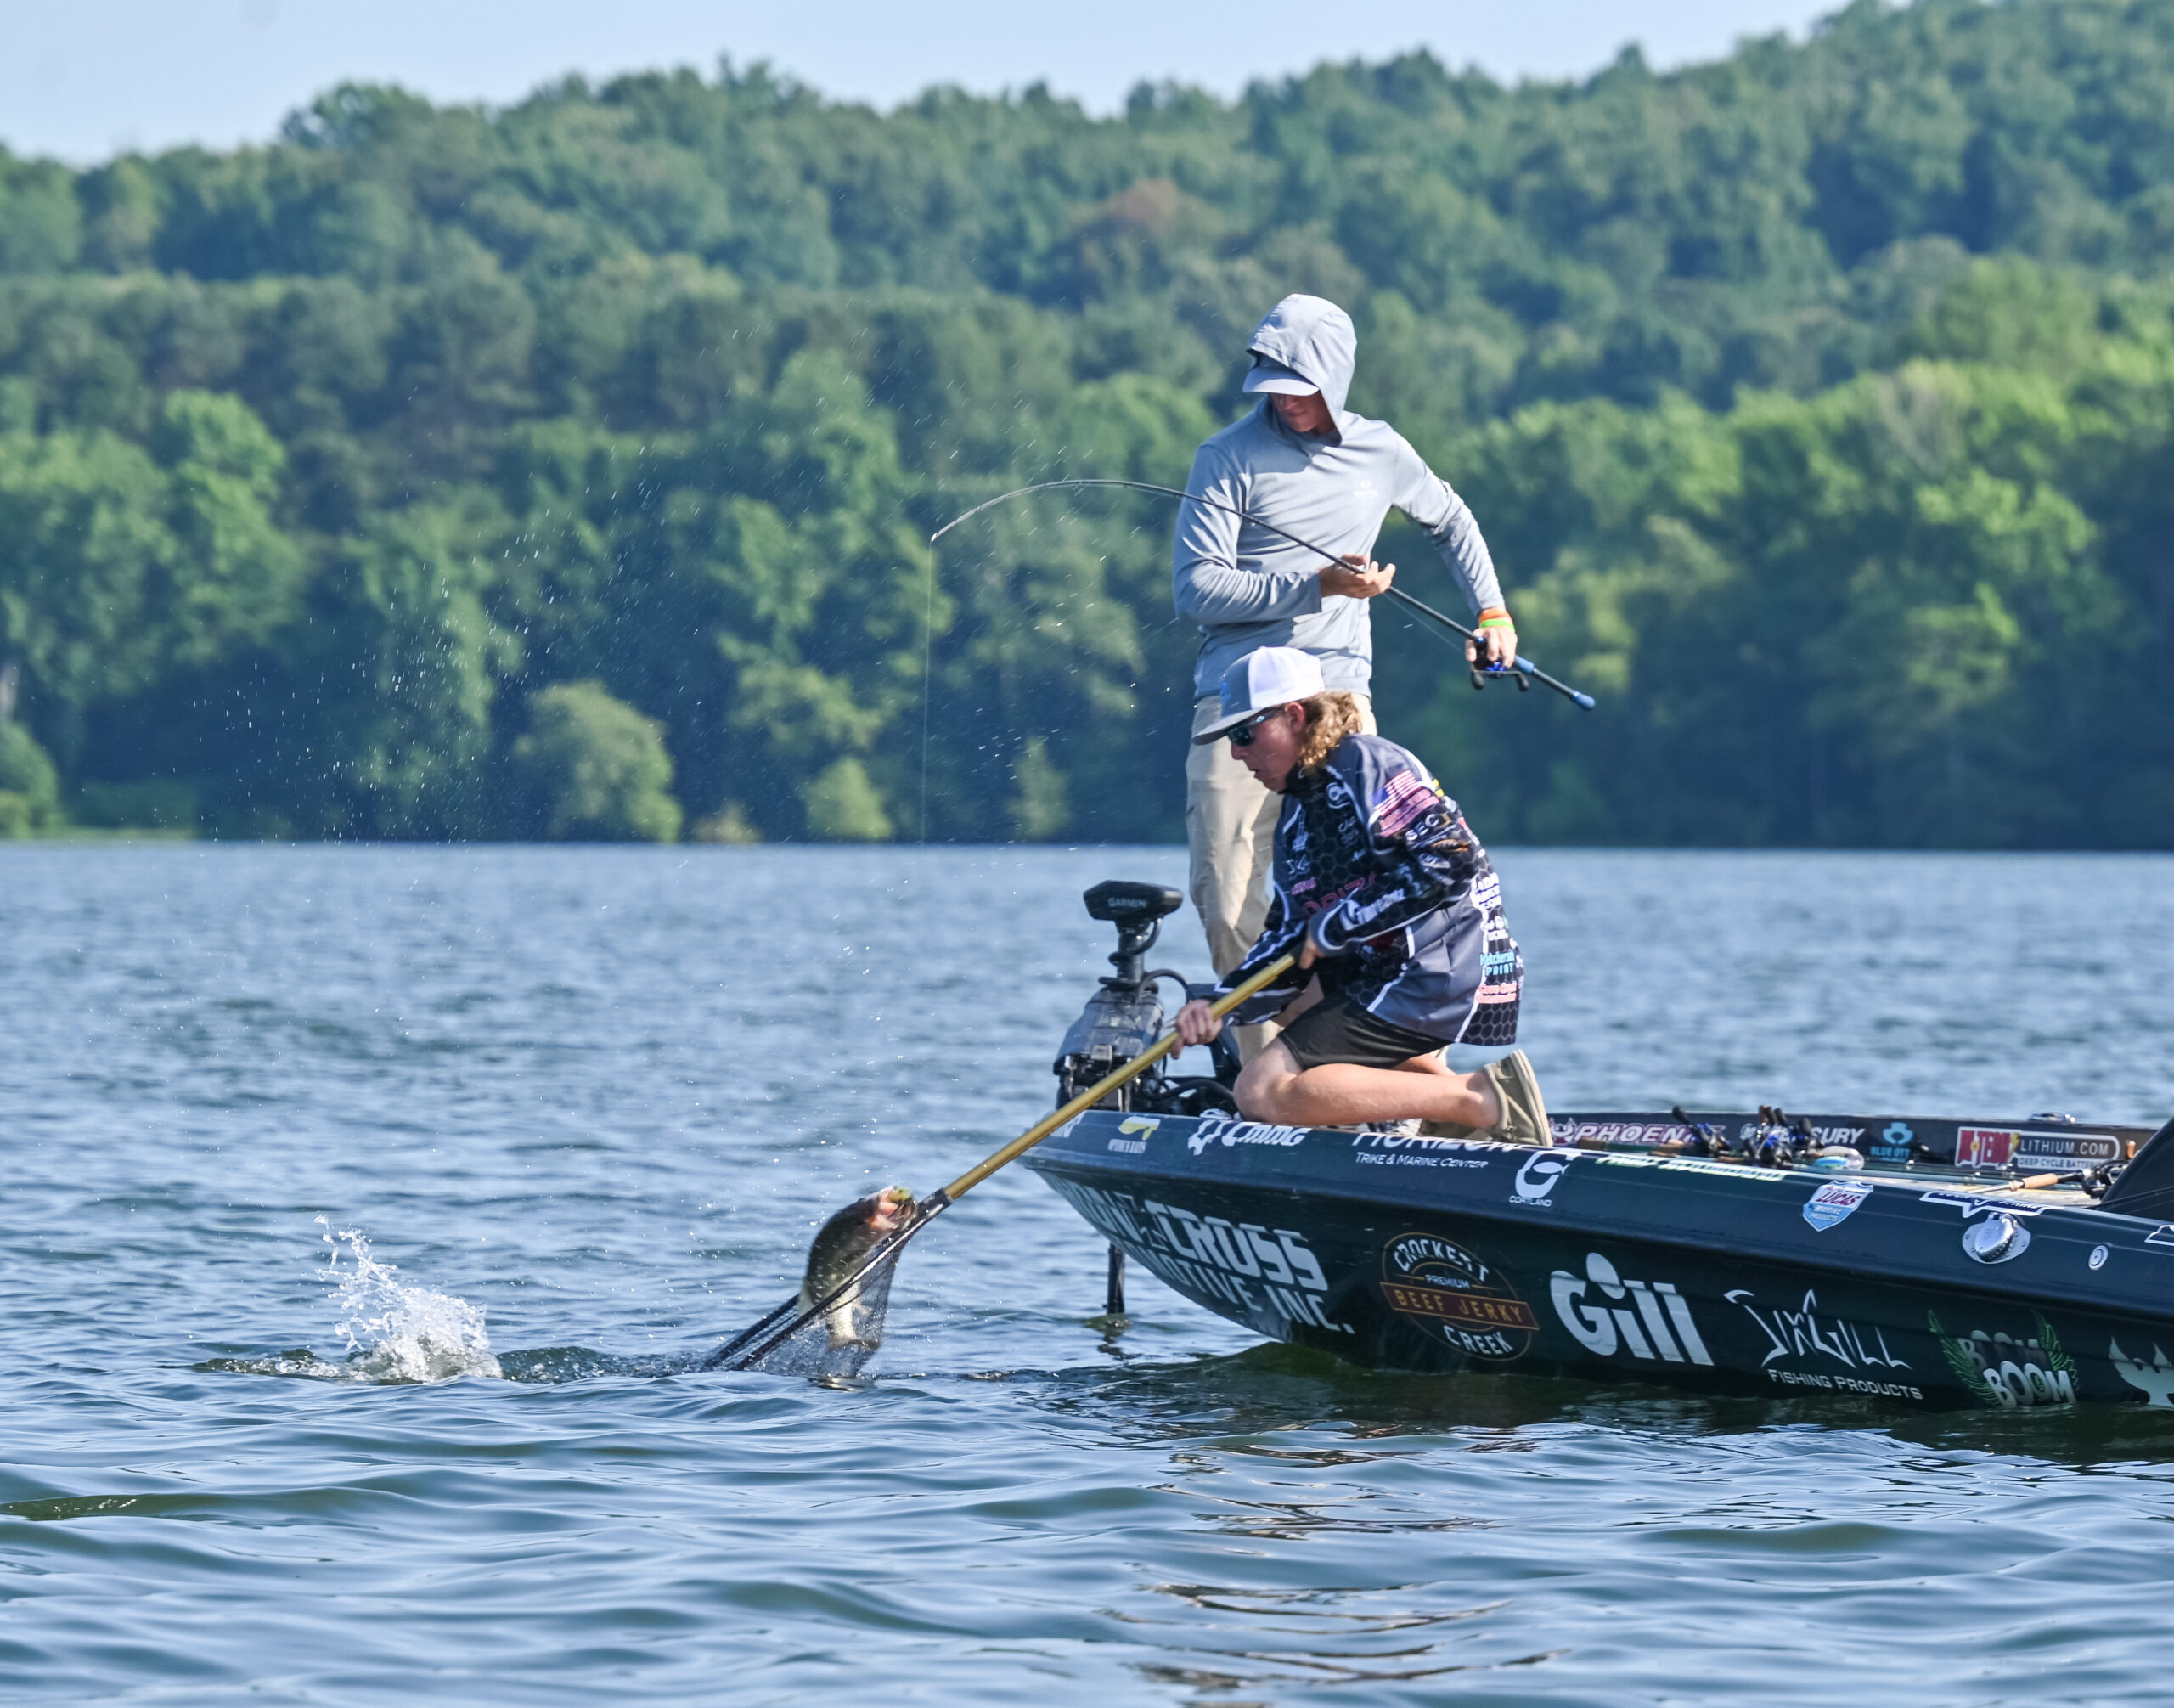 GALLERY: High School National Championship on Pickwick Lake - Day